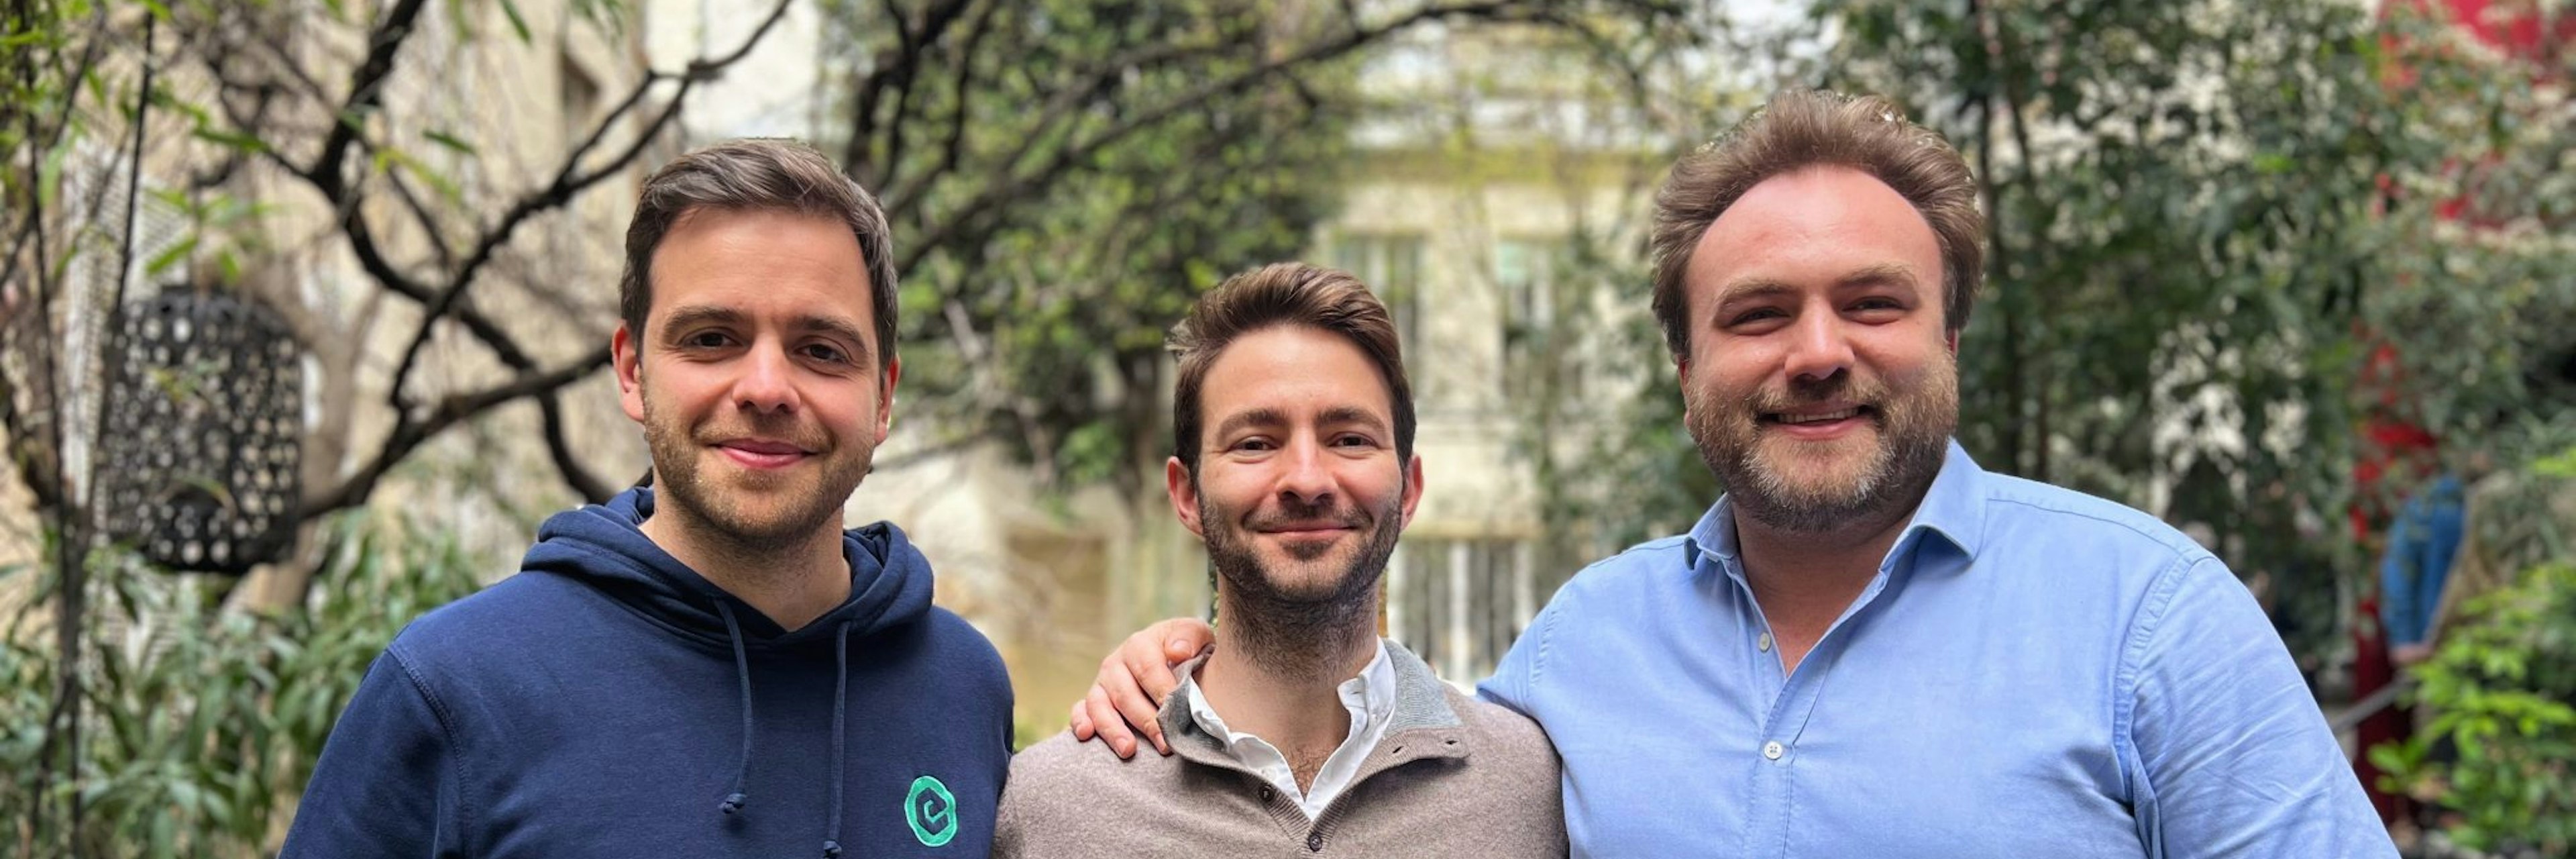 A landscape photo of the cofounders of Roumdtable